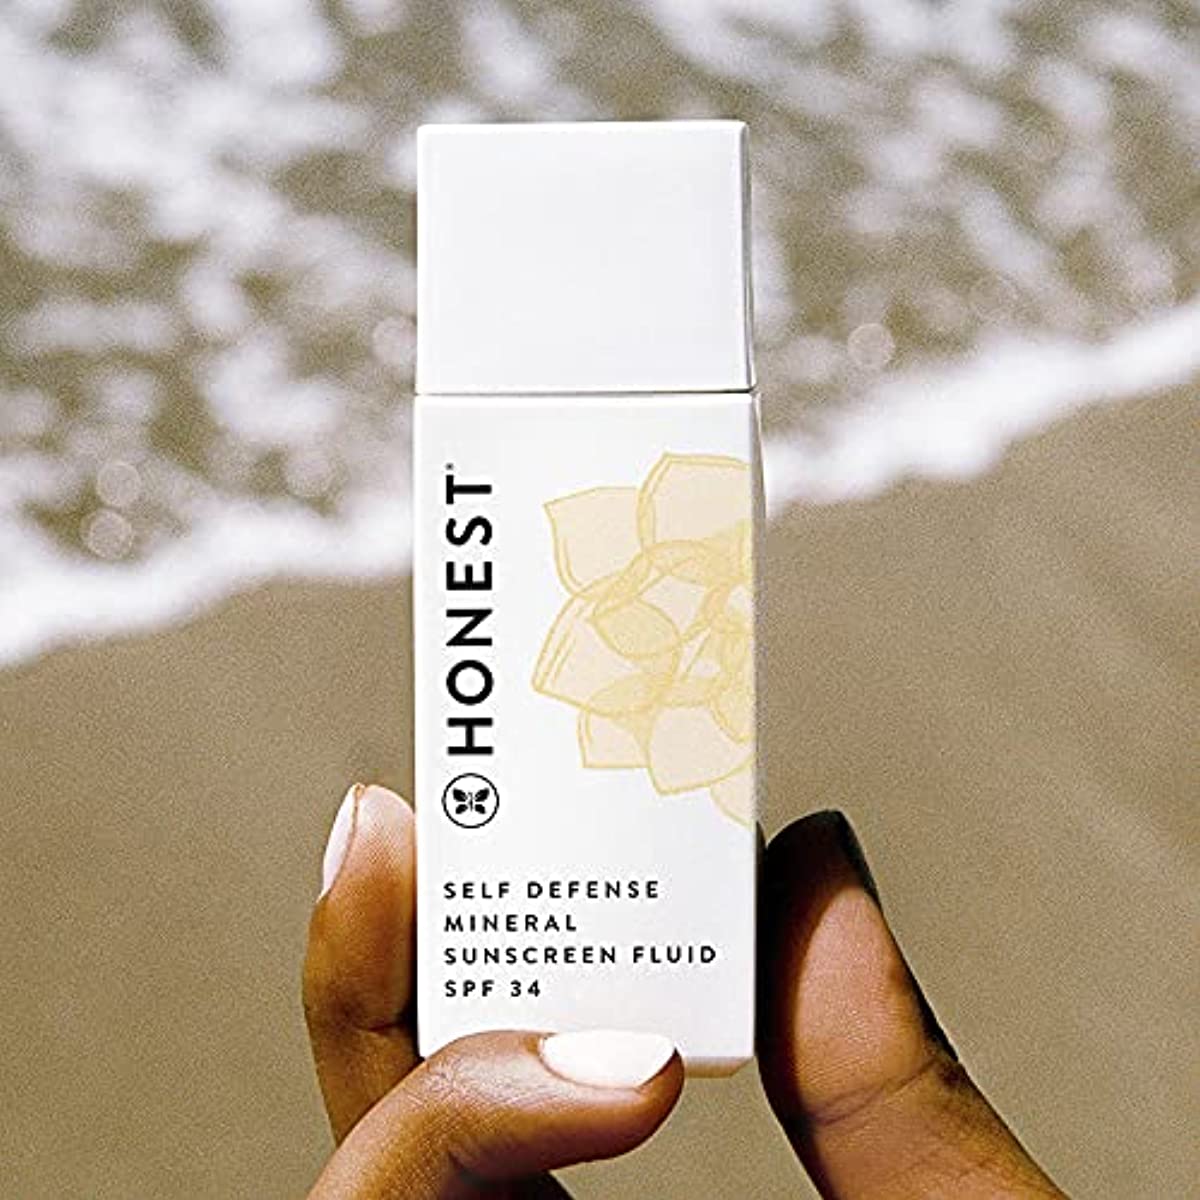 Honest Beauty Self Defense Protecting Mineral Sunscreen Fluid Spf 34 with Non Nano Nineral Sunscreen Fluid | Daily Face Sunscreen | Dermatologist tested + Hypoallergenic | Reef friendly | 1 fl. oz.